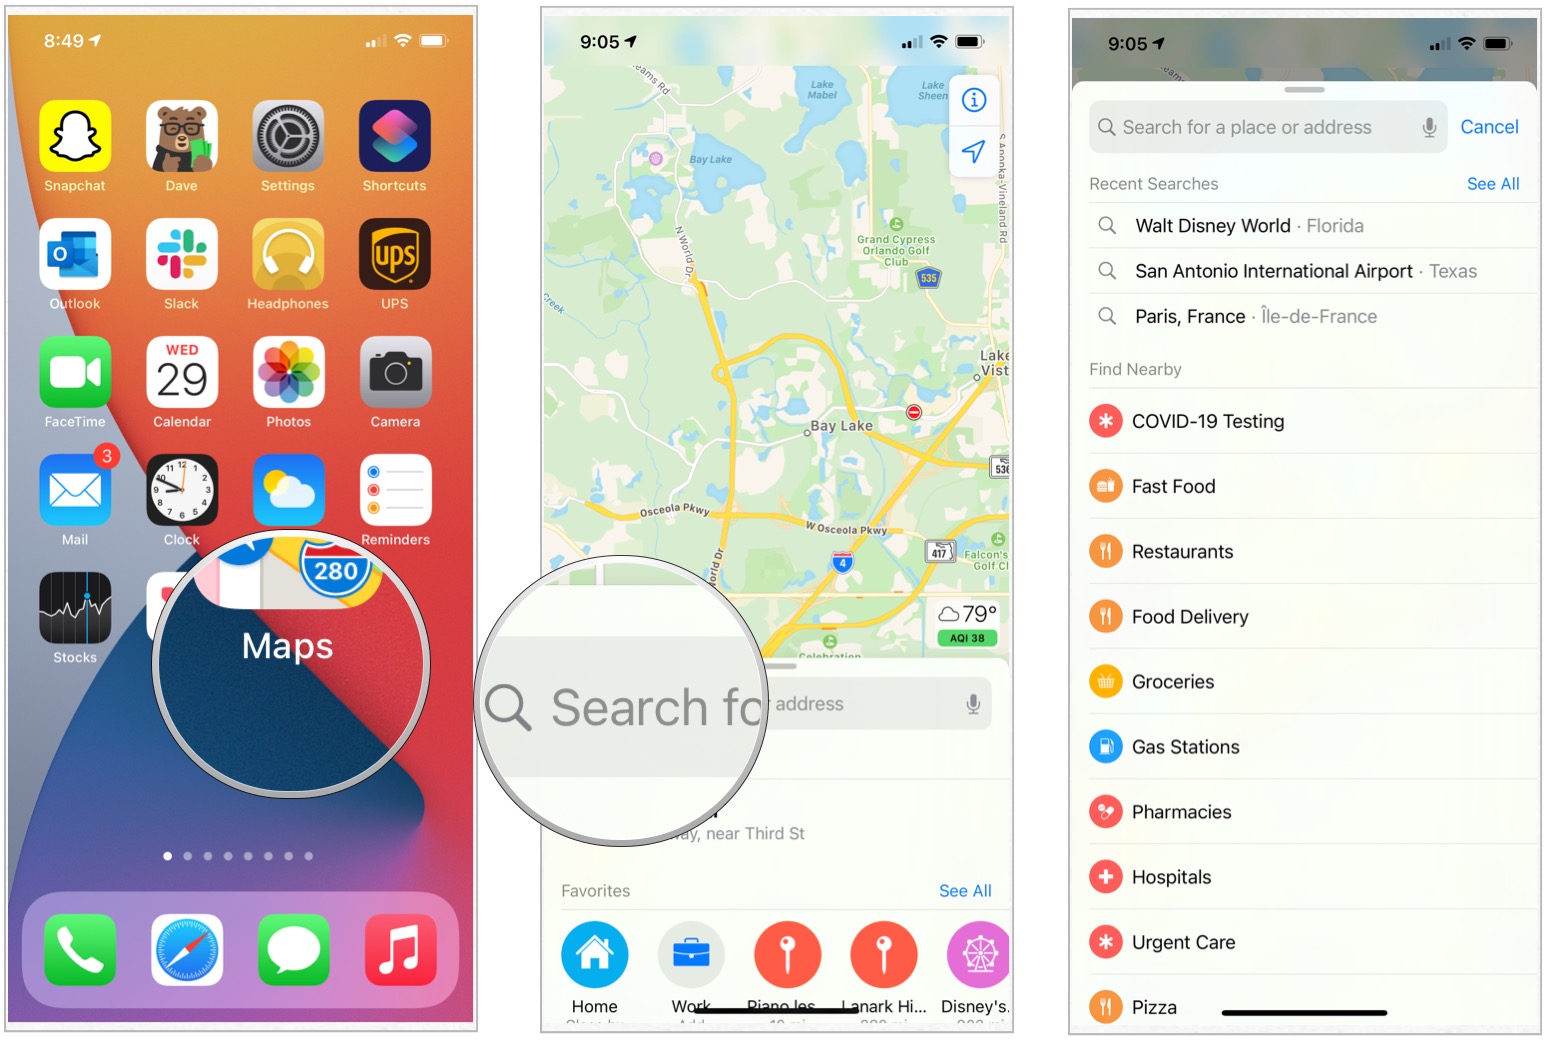 To review a recent search, launch the Maps app, tap on the search bar, choose the previous location